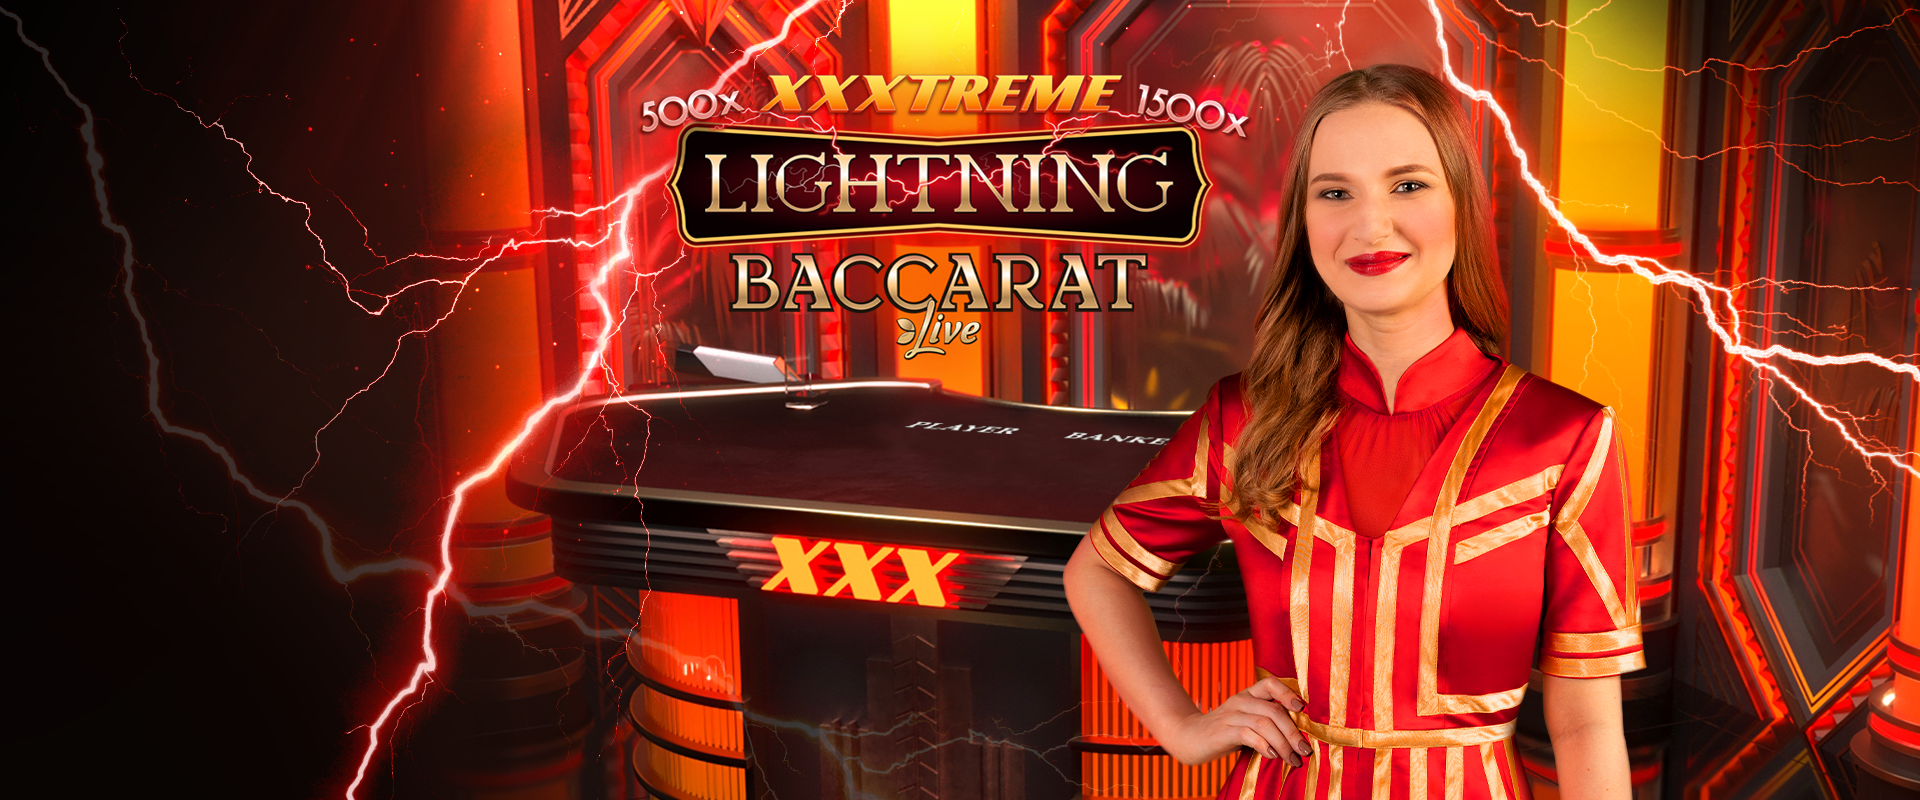 The Live Casino Game XXXtreme Lightning Baccarat from Evolution